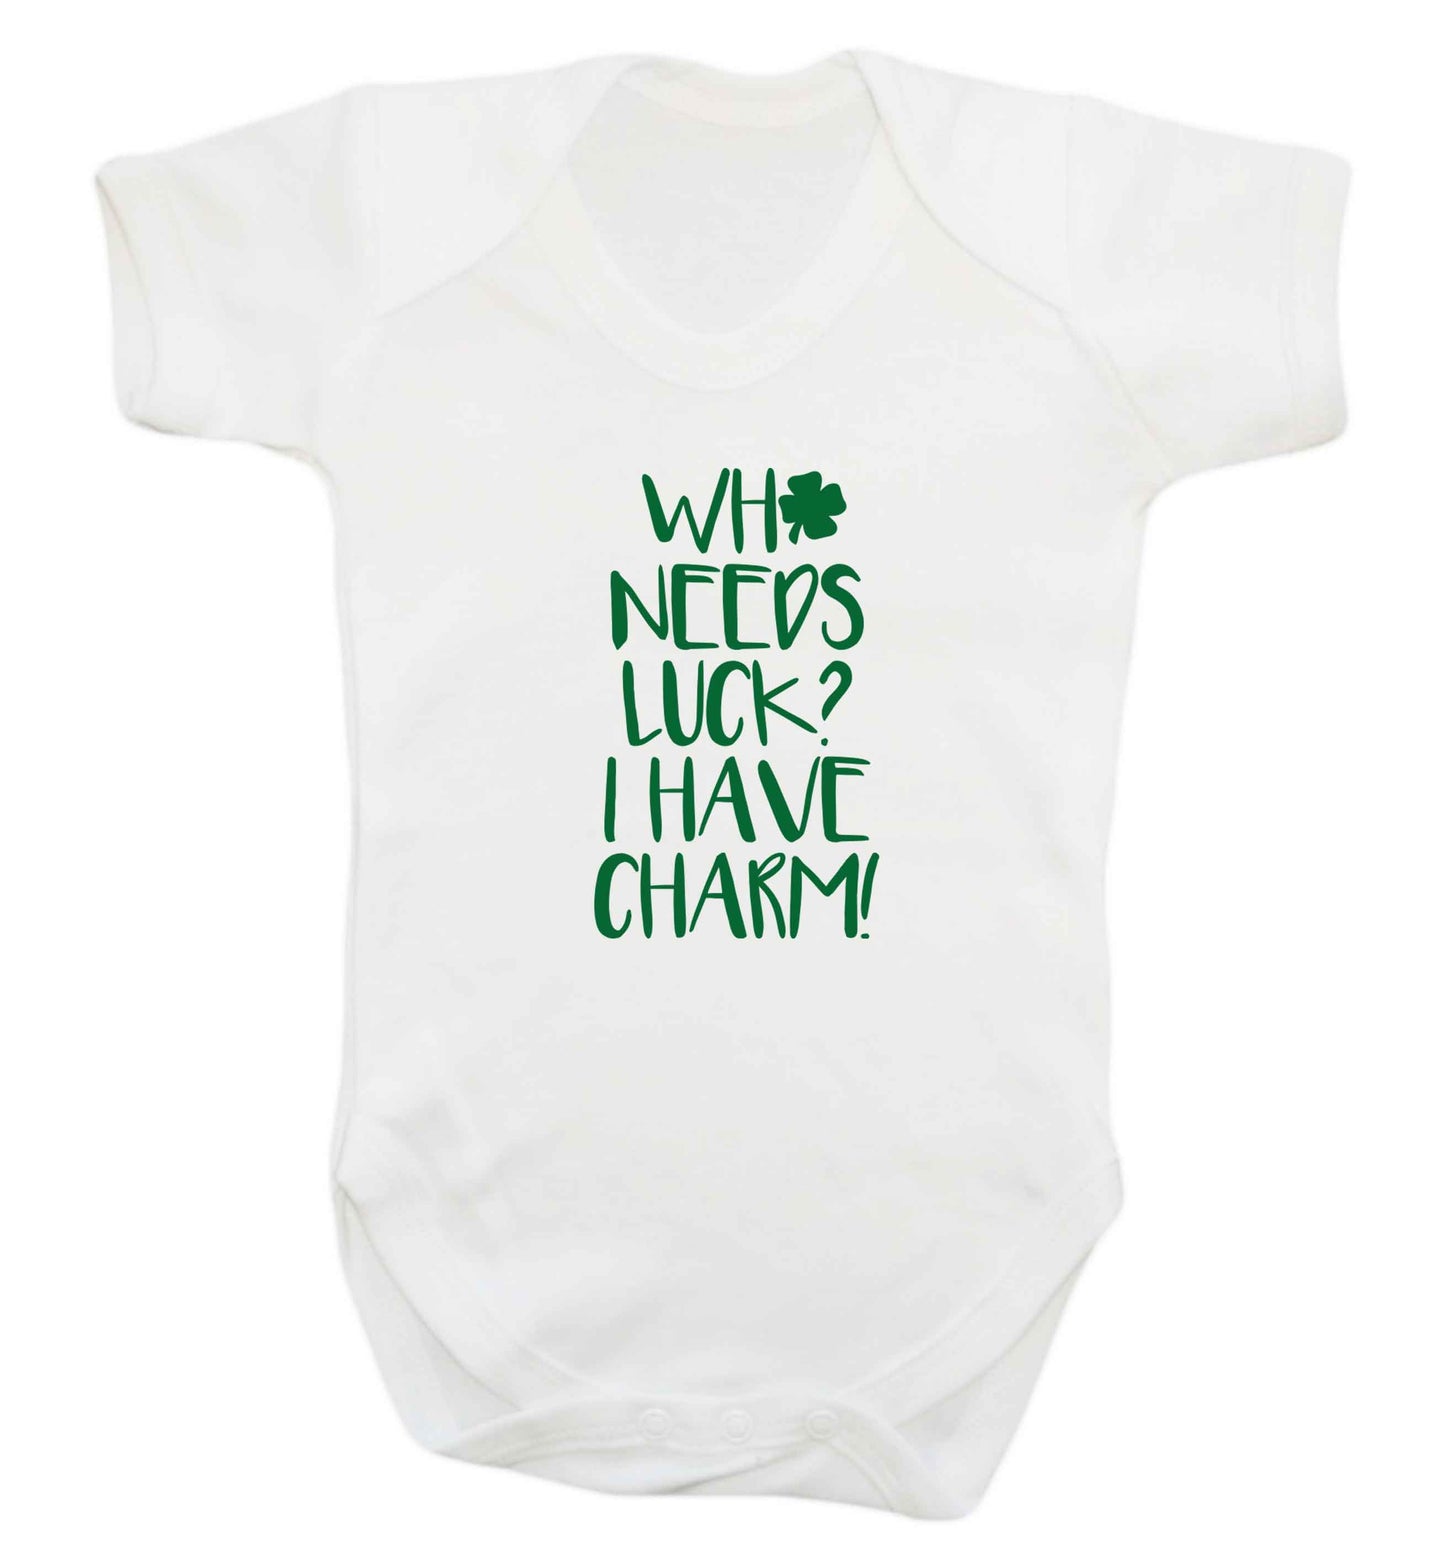 Who needs luck? I have charm! baby vest white 18-24 months